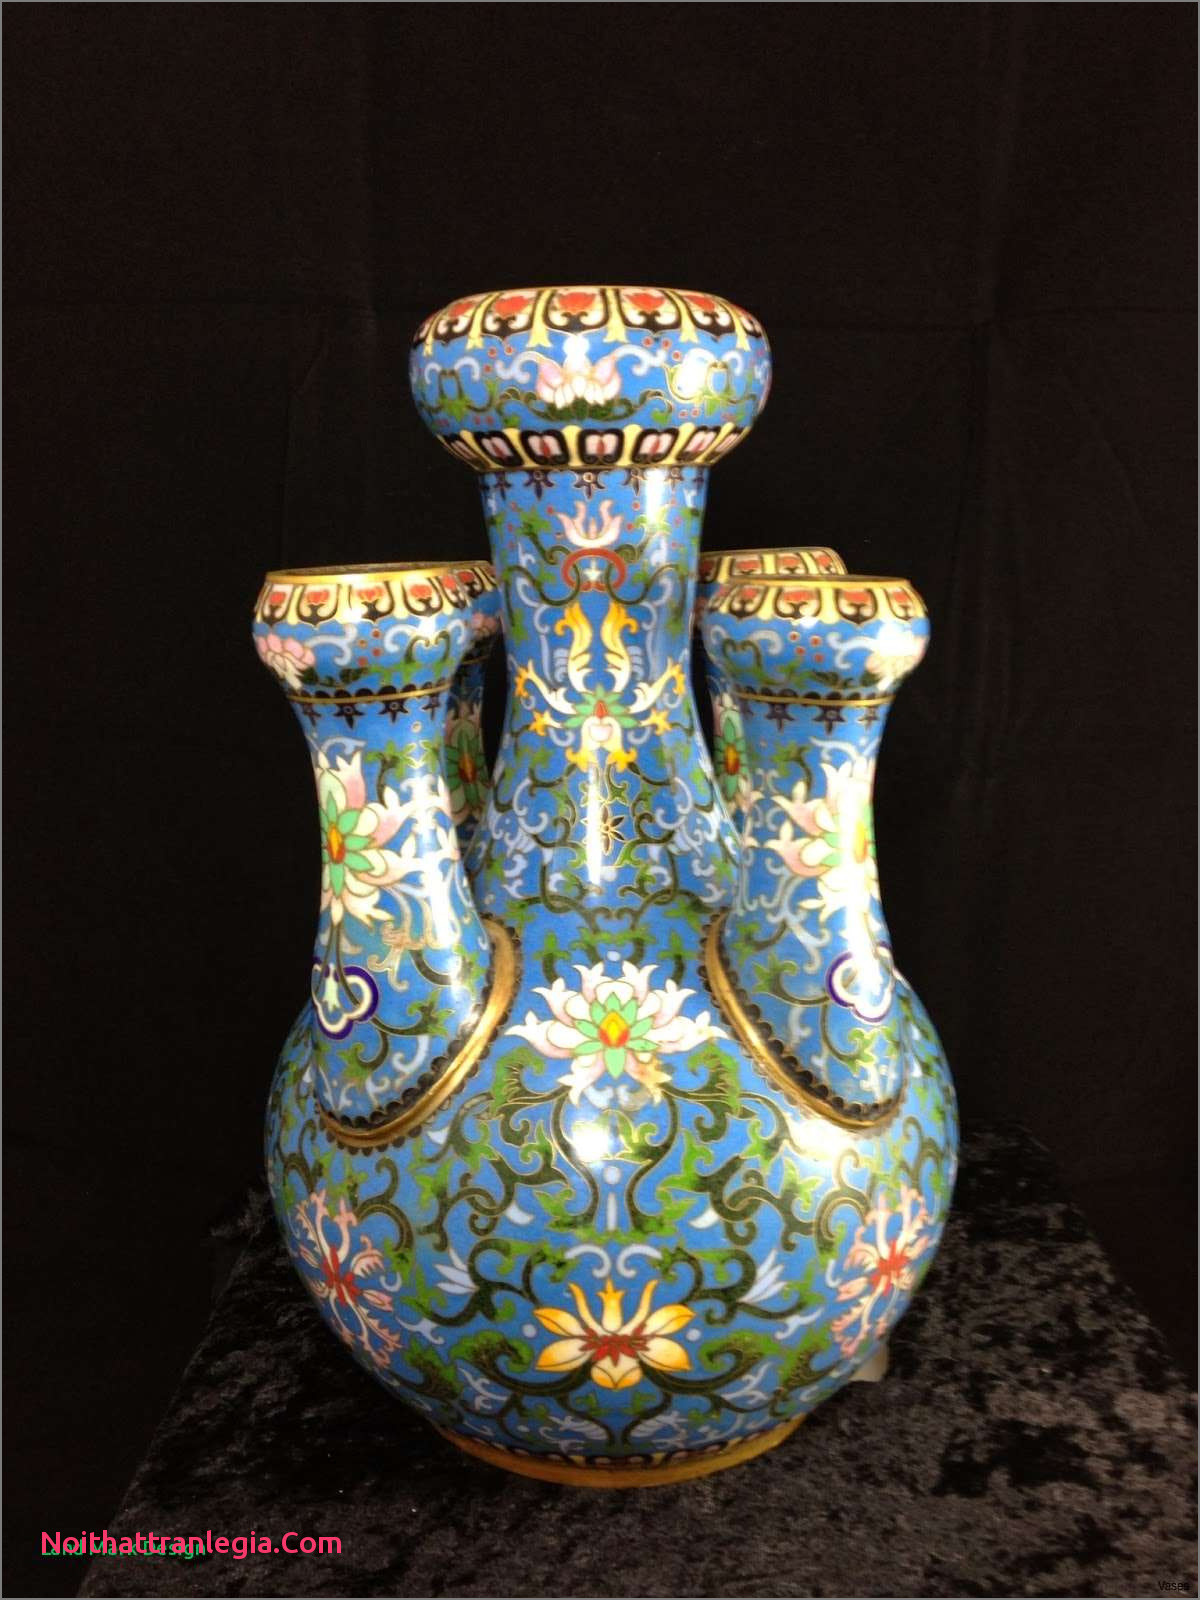 10 Wonderful Vintage Japanese Cloisonne Vase 2024 free download vintage japanese cloisonne vase of 20 chinese antique vase noithattranlegia vases design intended for 213 1h vases antique asian the increased trade of chinese ware during 16th century has s